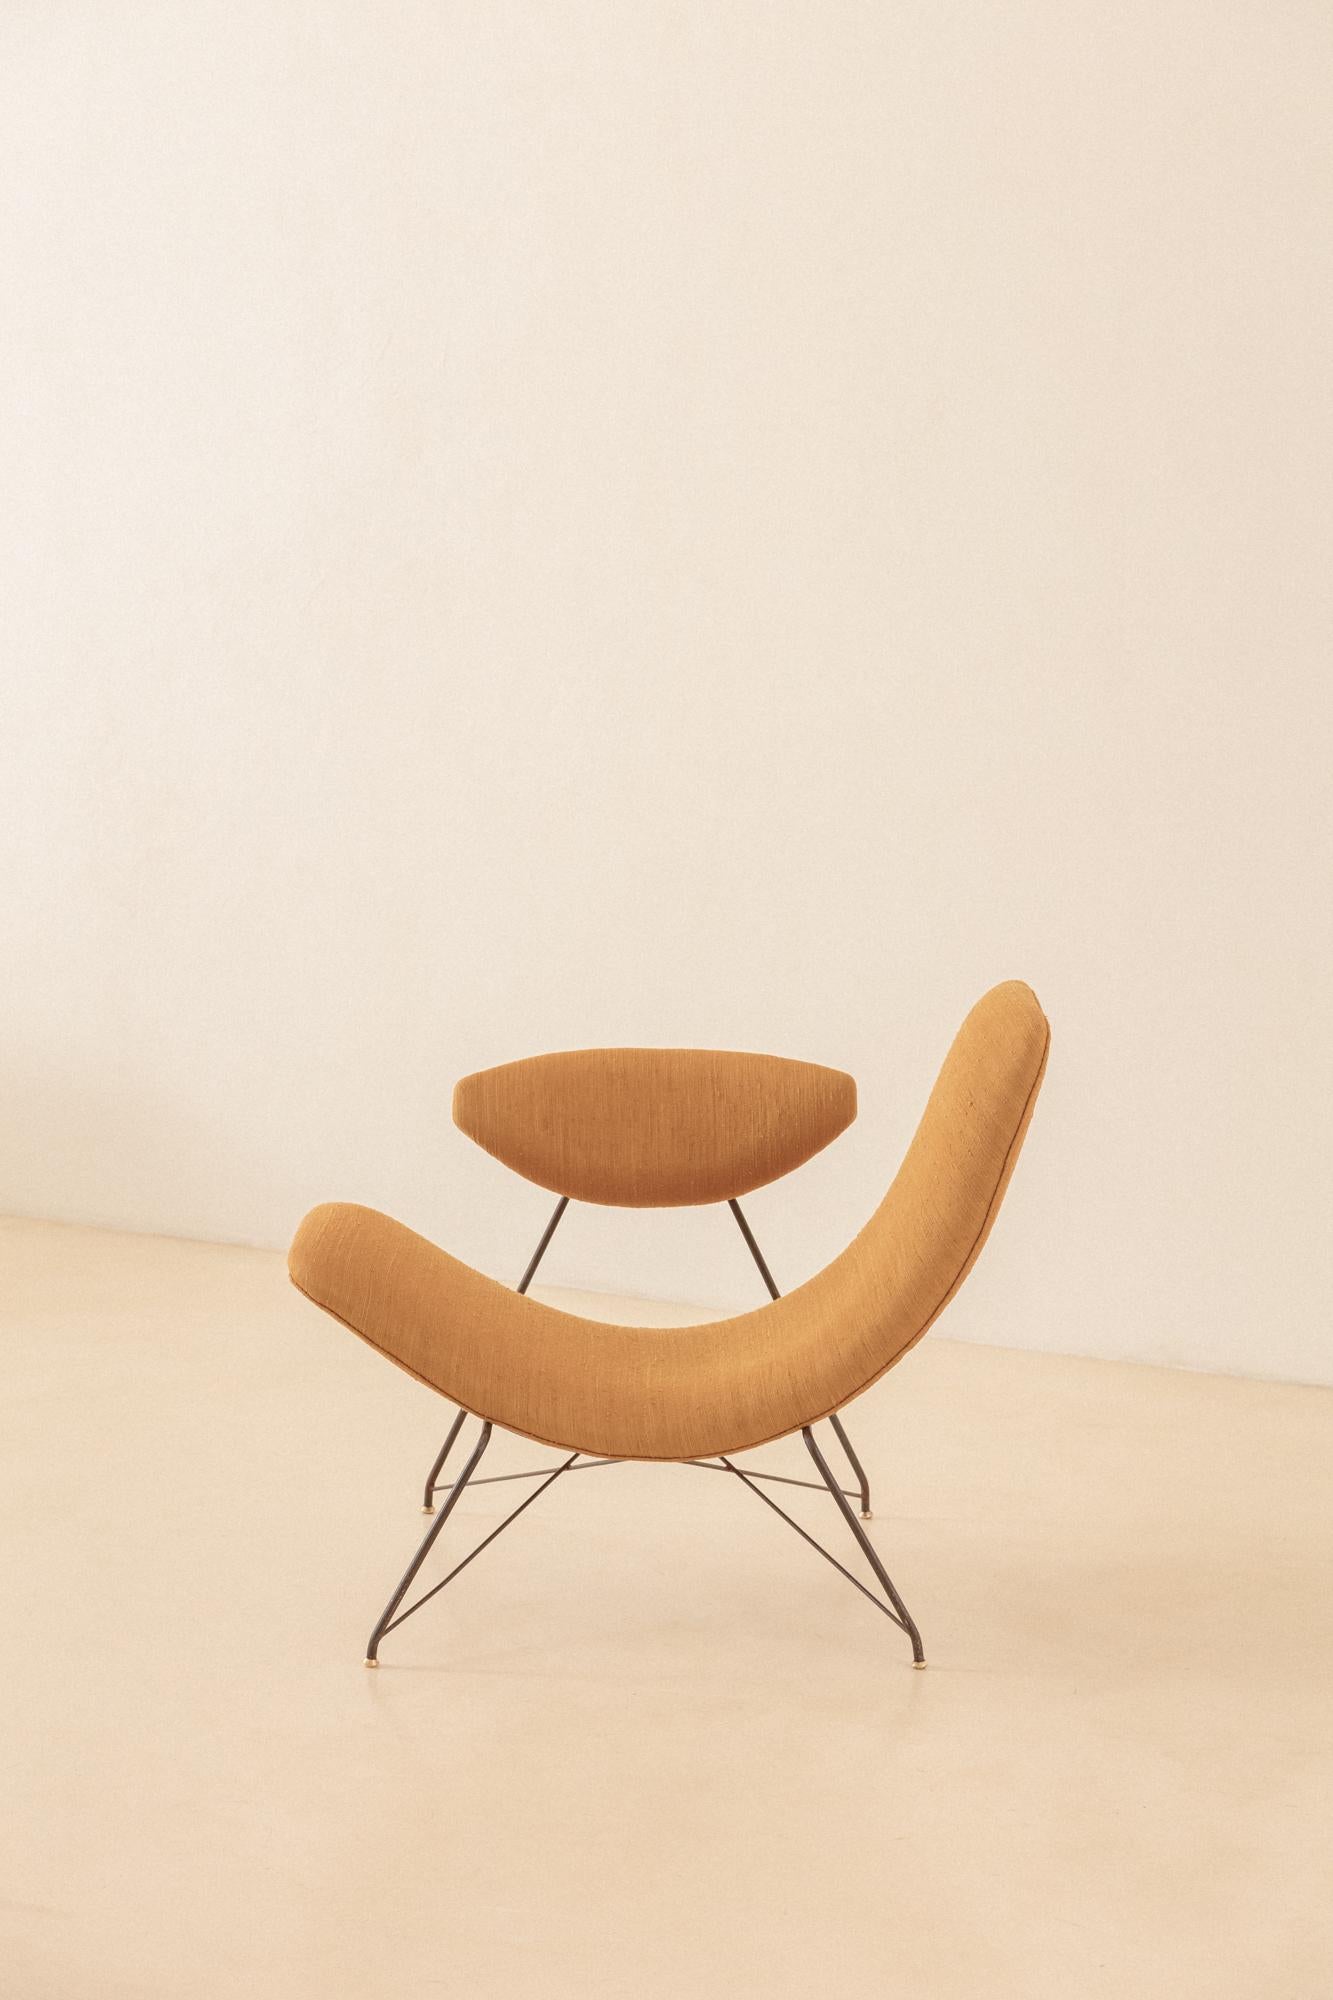 Martin Eisler designed this sculptural armchair in 1955. This piece is considered one of the most iconic armchairs of Brazilian Modern Design. The uniqueness of this armchair lies in several qualities. First, the form itself; provocative,